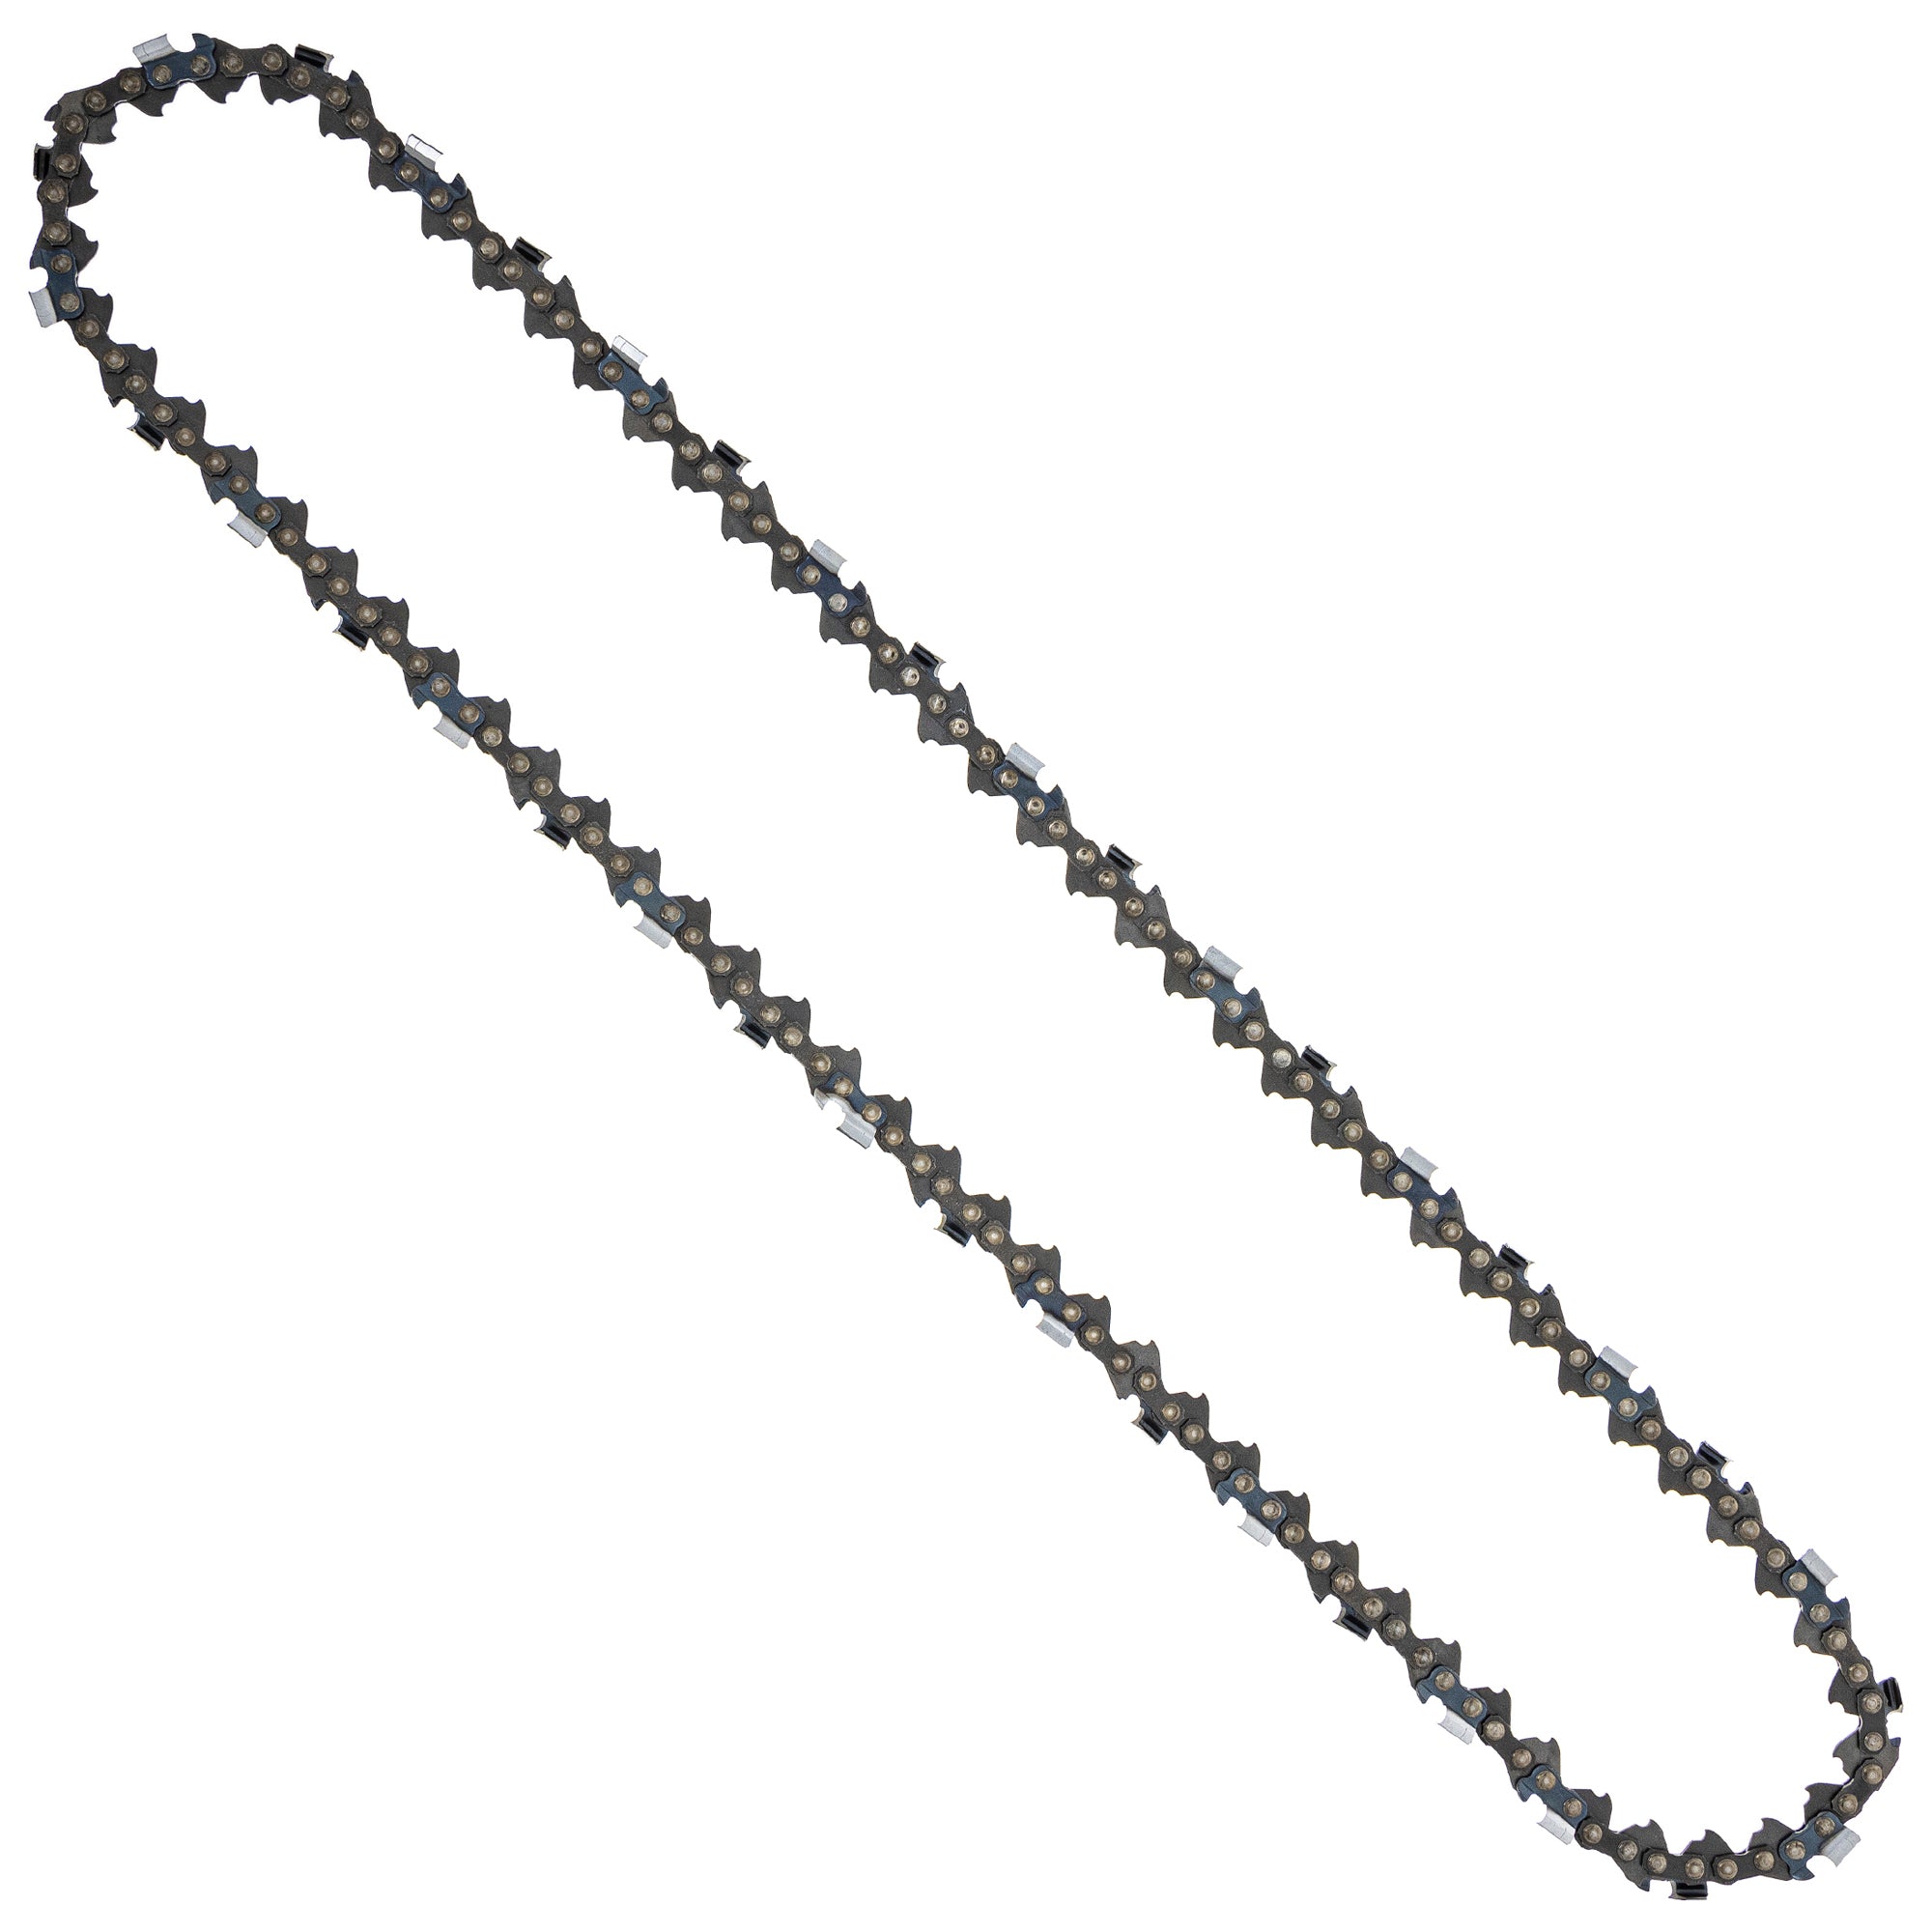 8TEN 810-CCC2398H Chain 10-Pack for zOTHER Oregon MS 634 30 040